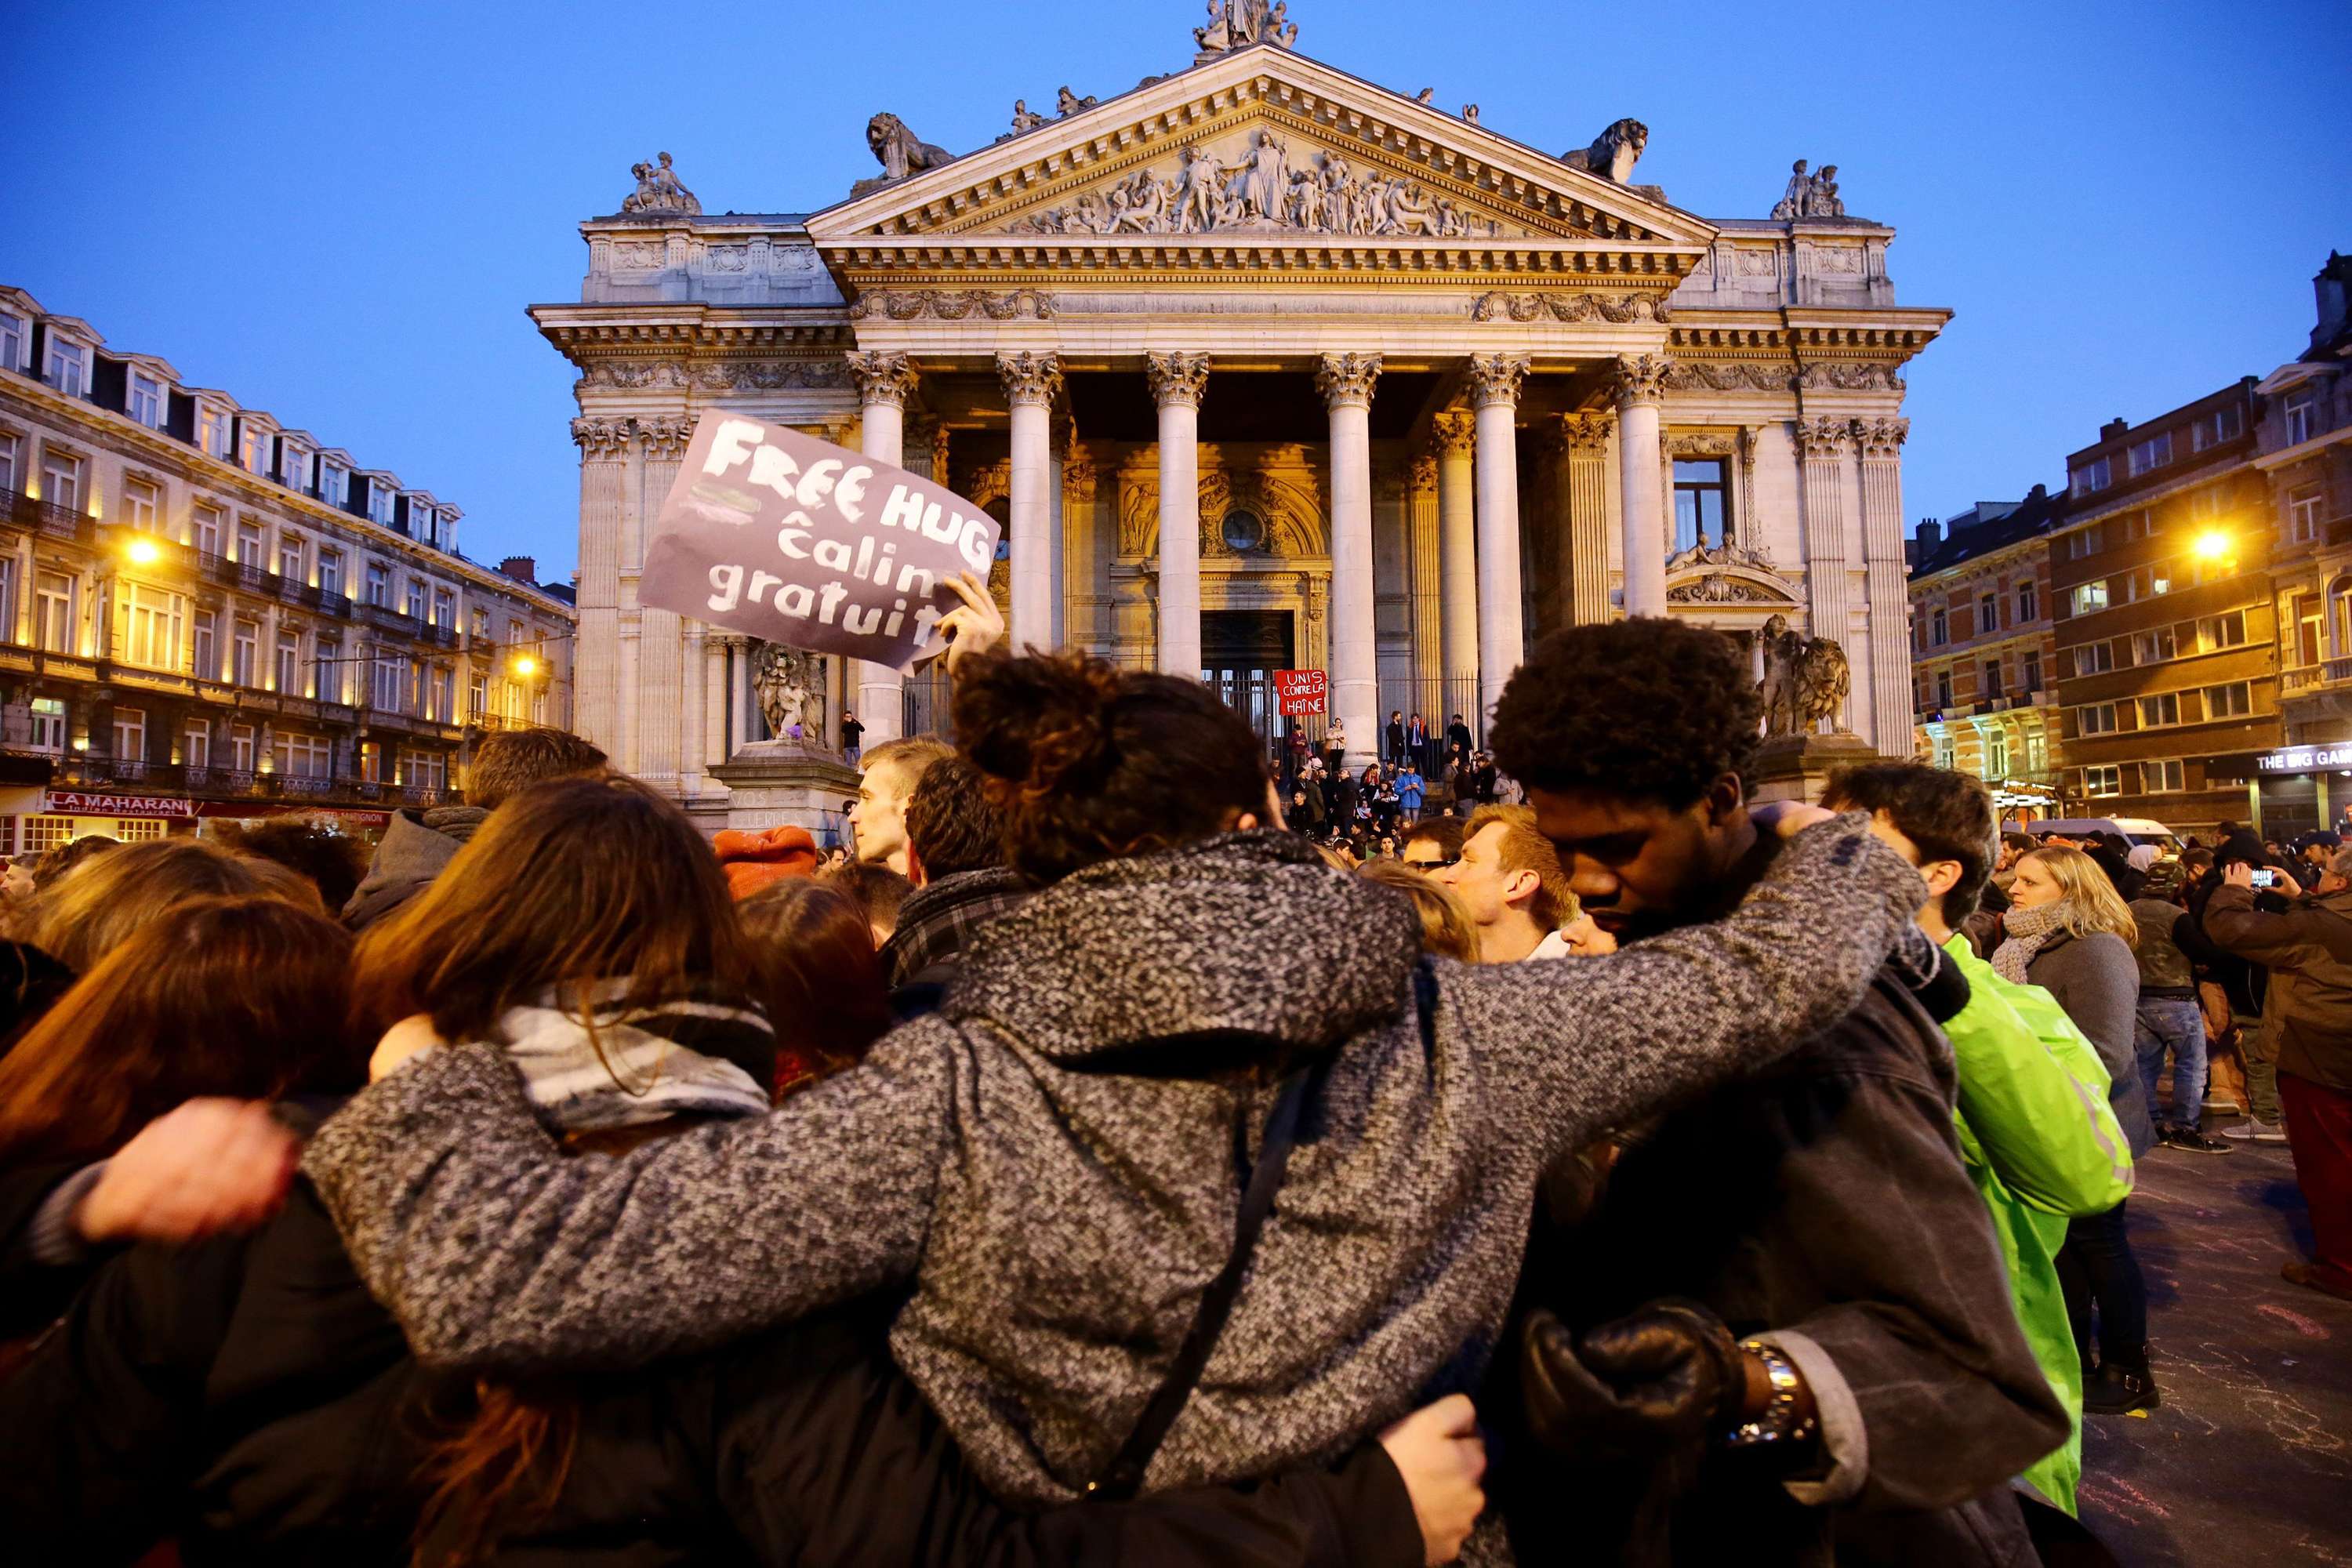 People gather at the Place de la Bourse in Brussels to leave messages and tributes following the terrorist attacks on March 22. Photo: PA Wire/Zuma Press/Tribune News Service